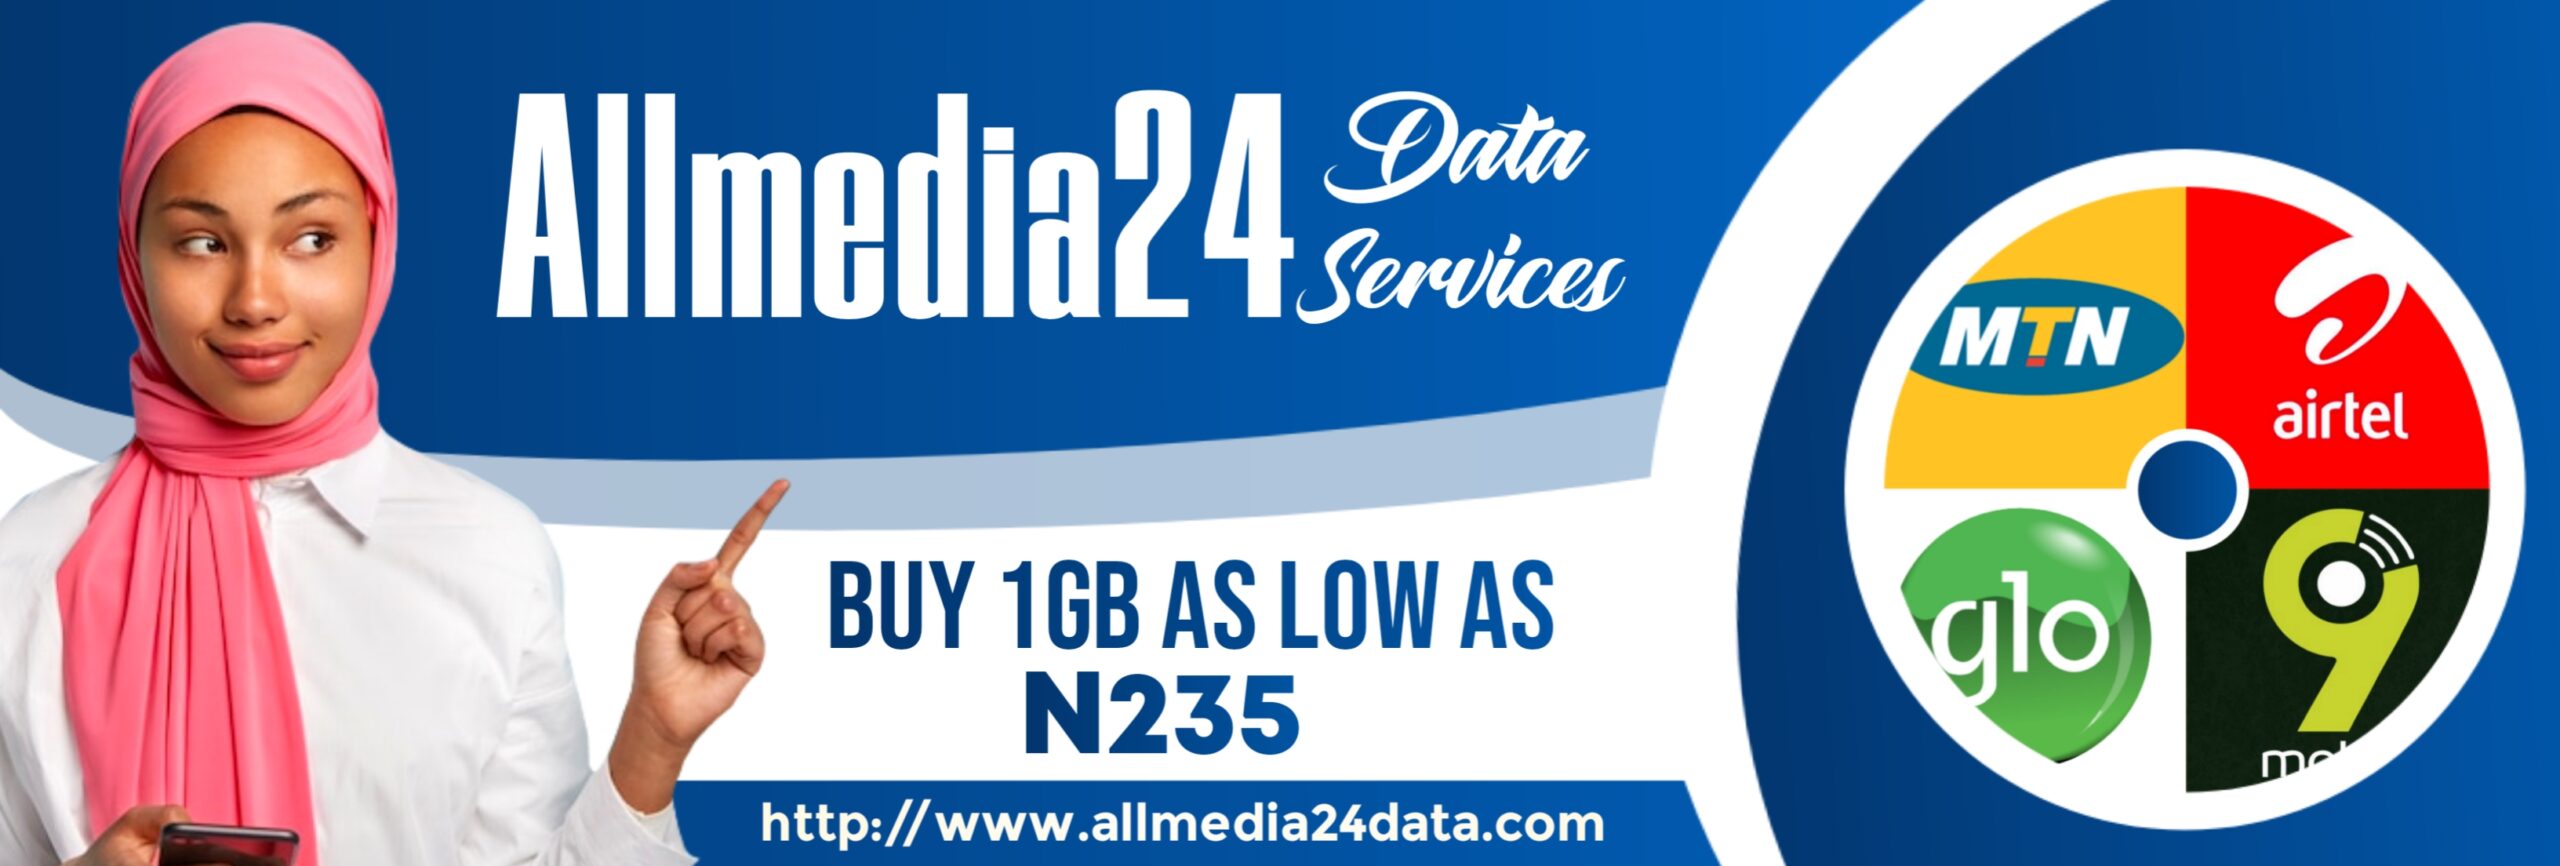 Affordable Data Plans for MTN, Airtel, Glo, and 9mobile at allmedia24data.com